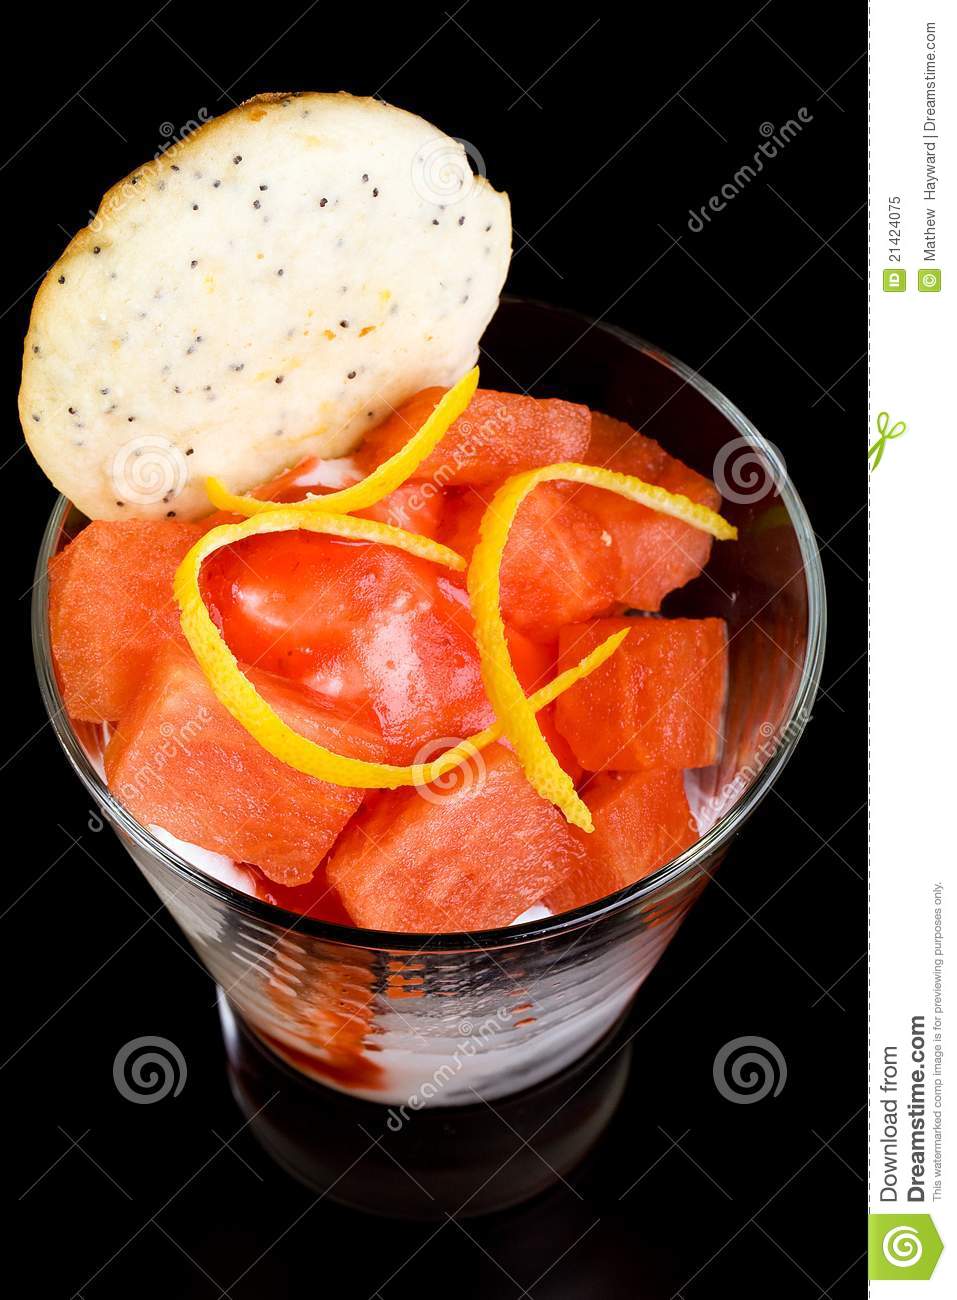 Fruit Cup For Dessert Royalty Free Stock Photo   Image  21424075